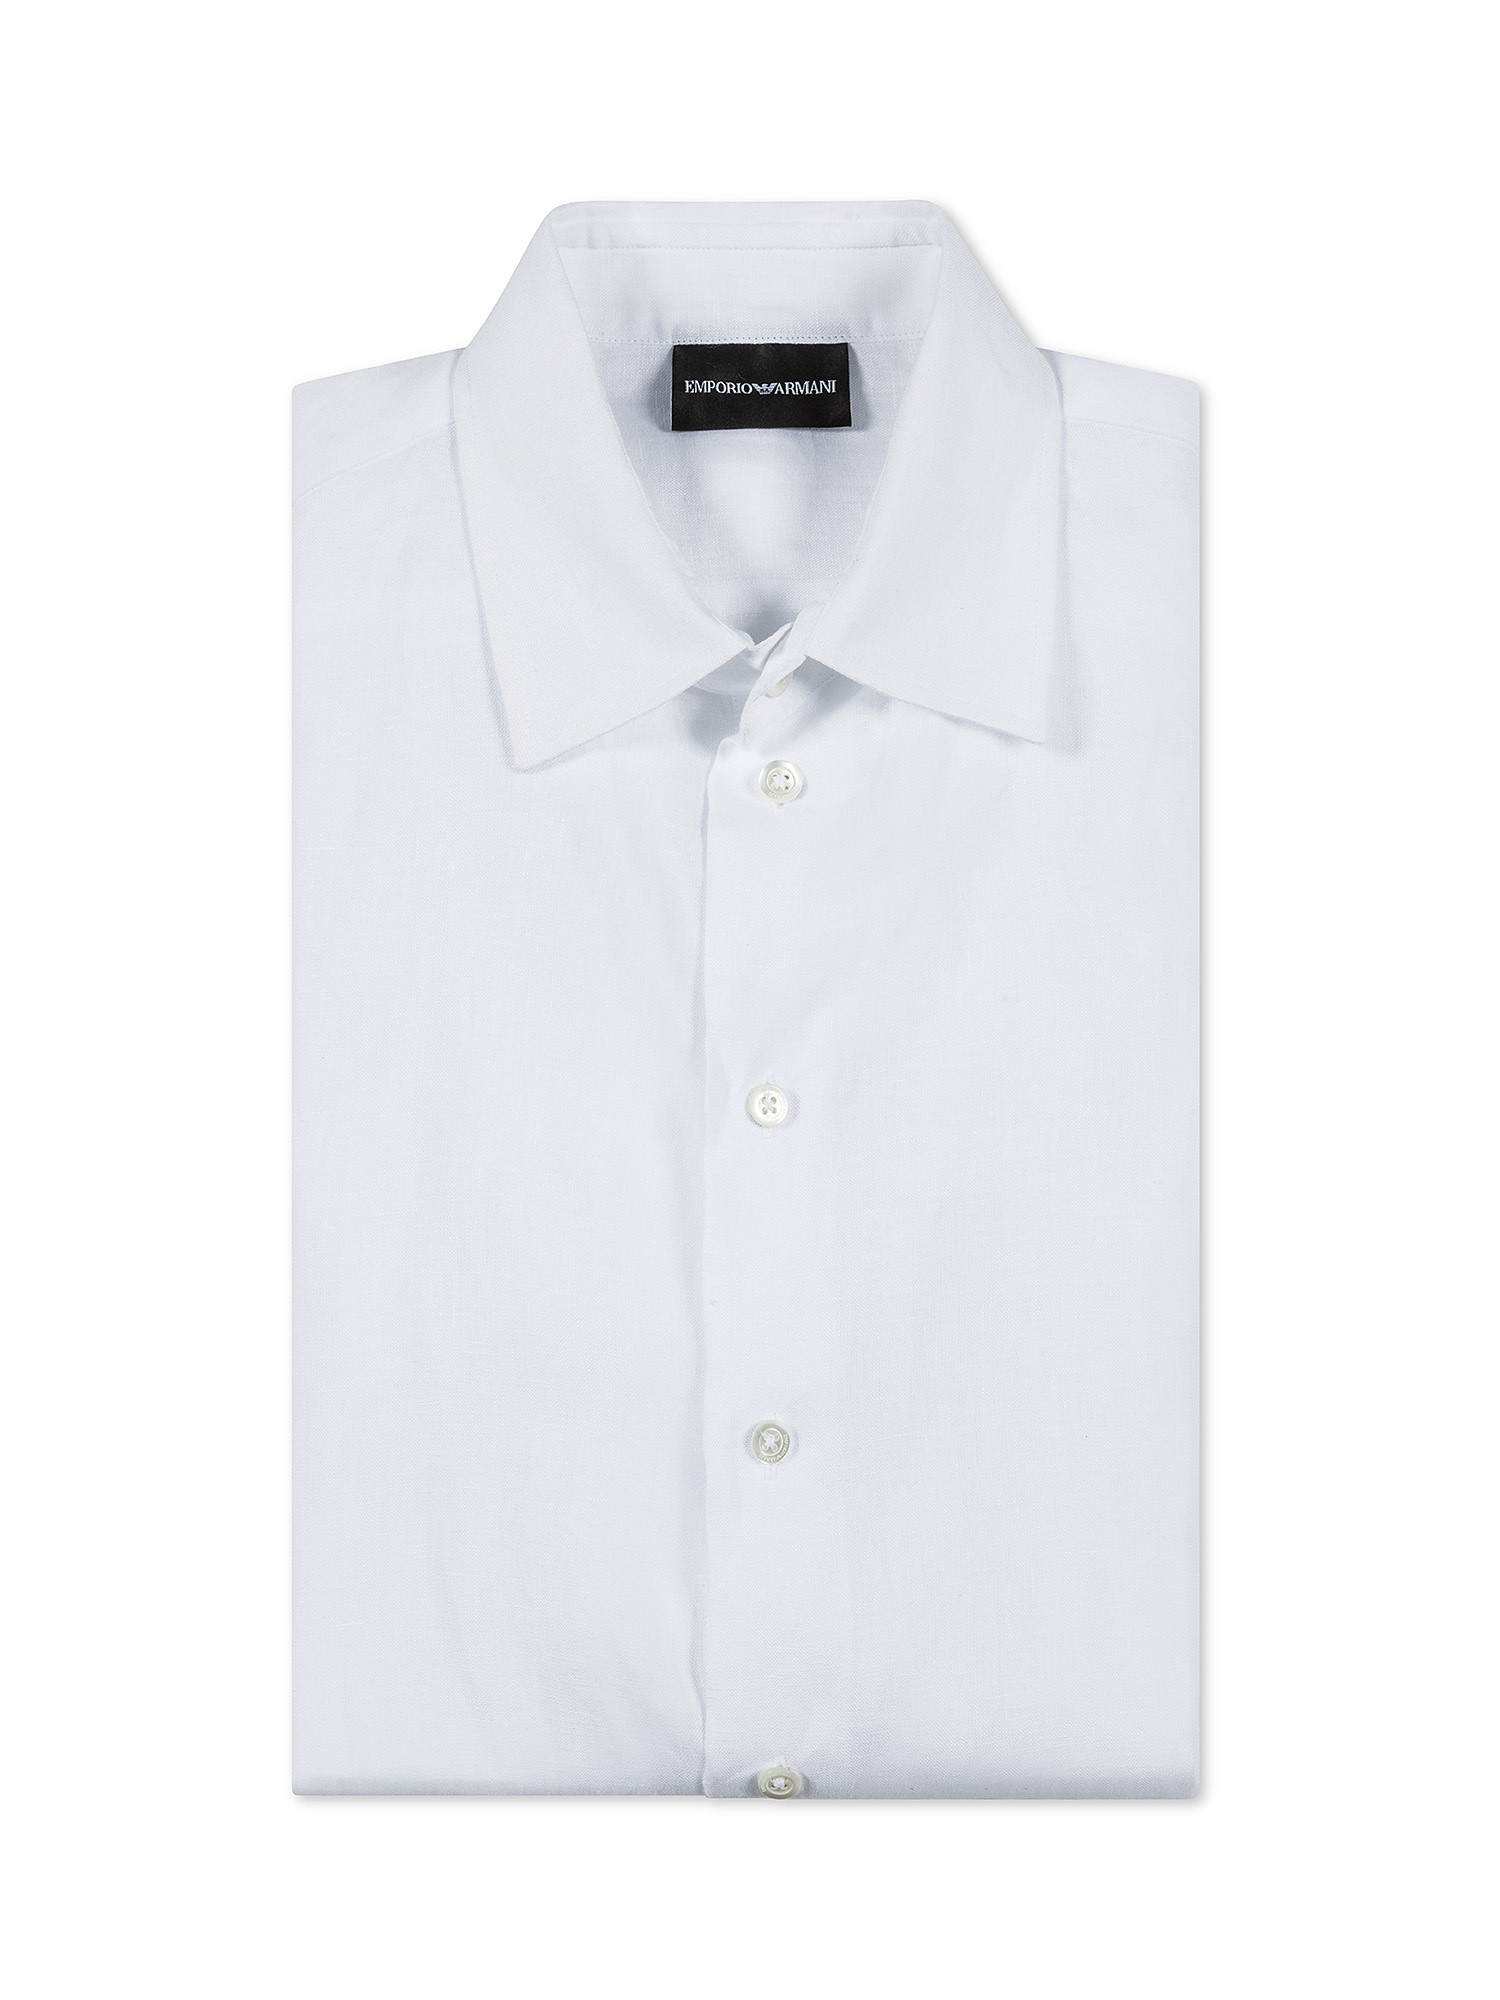 Emporio Armani - Relaxed fit shirt in pure linen, White, large image number 0